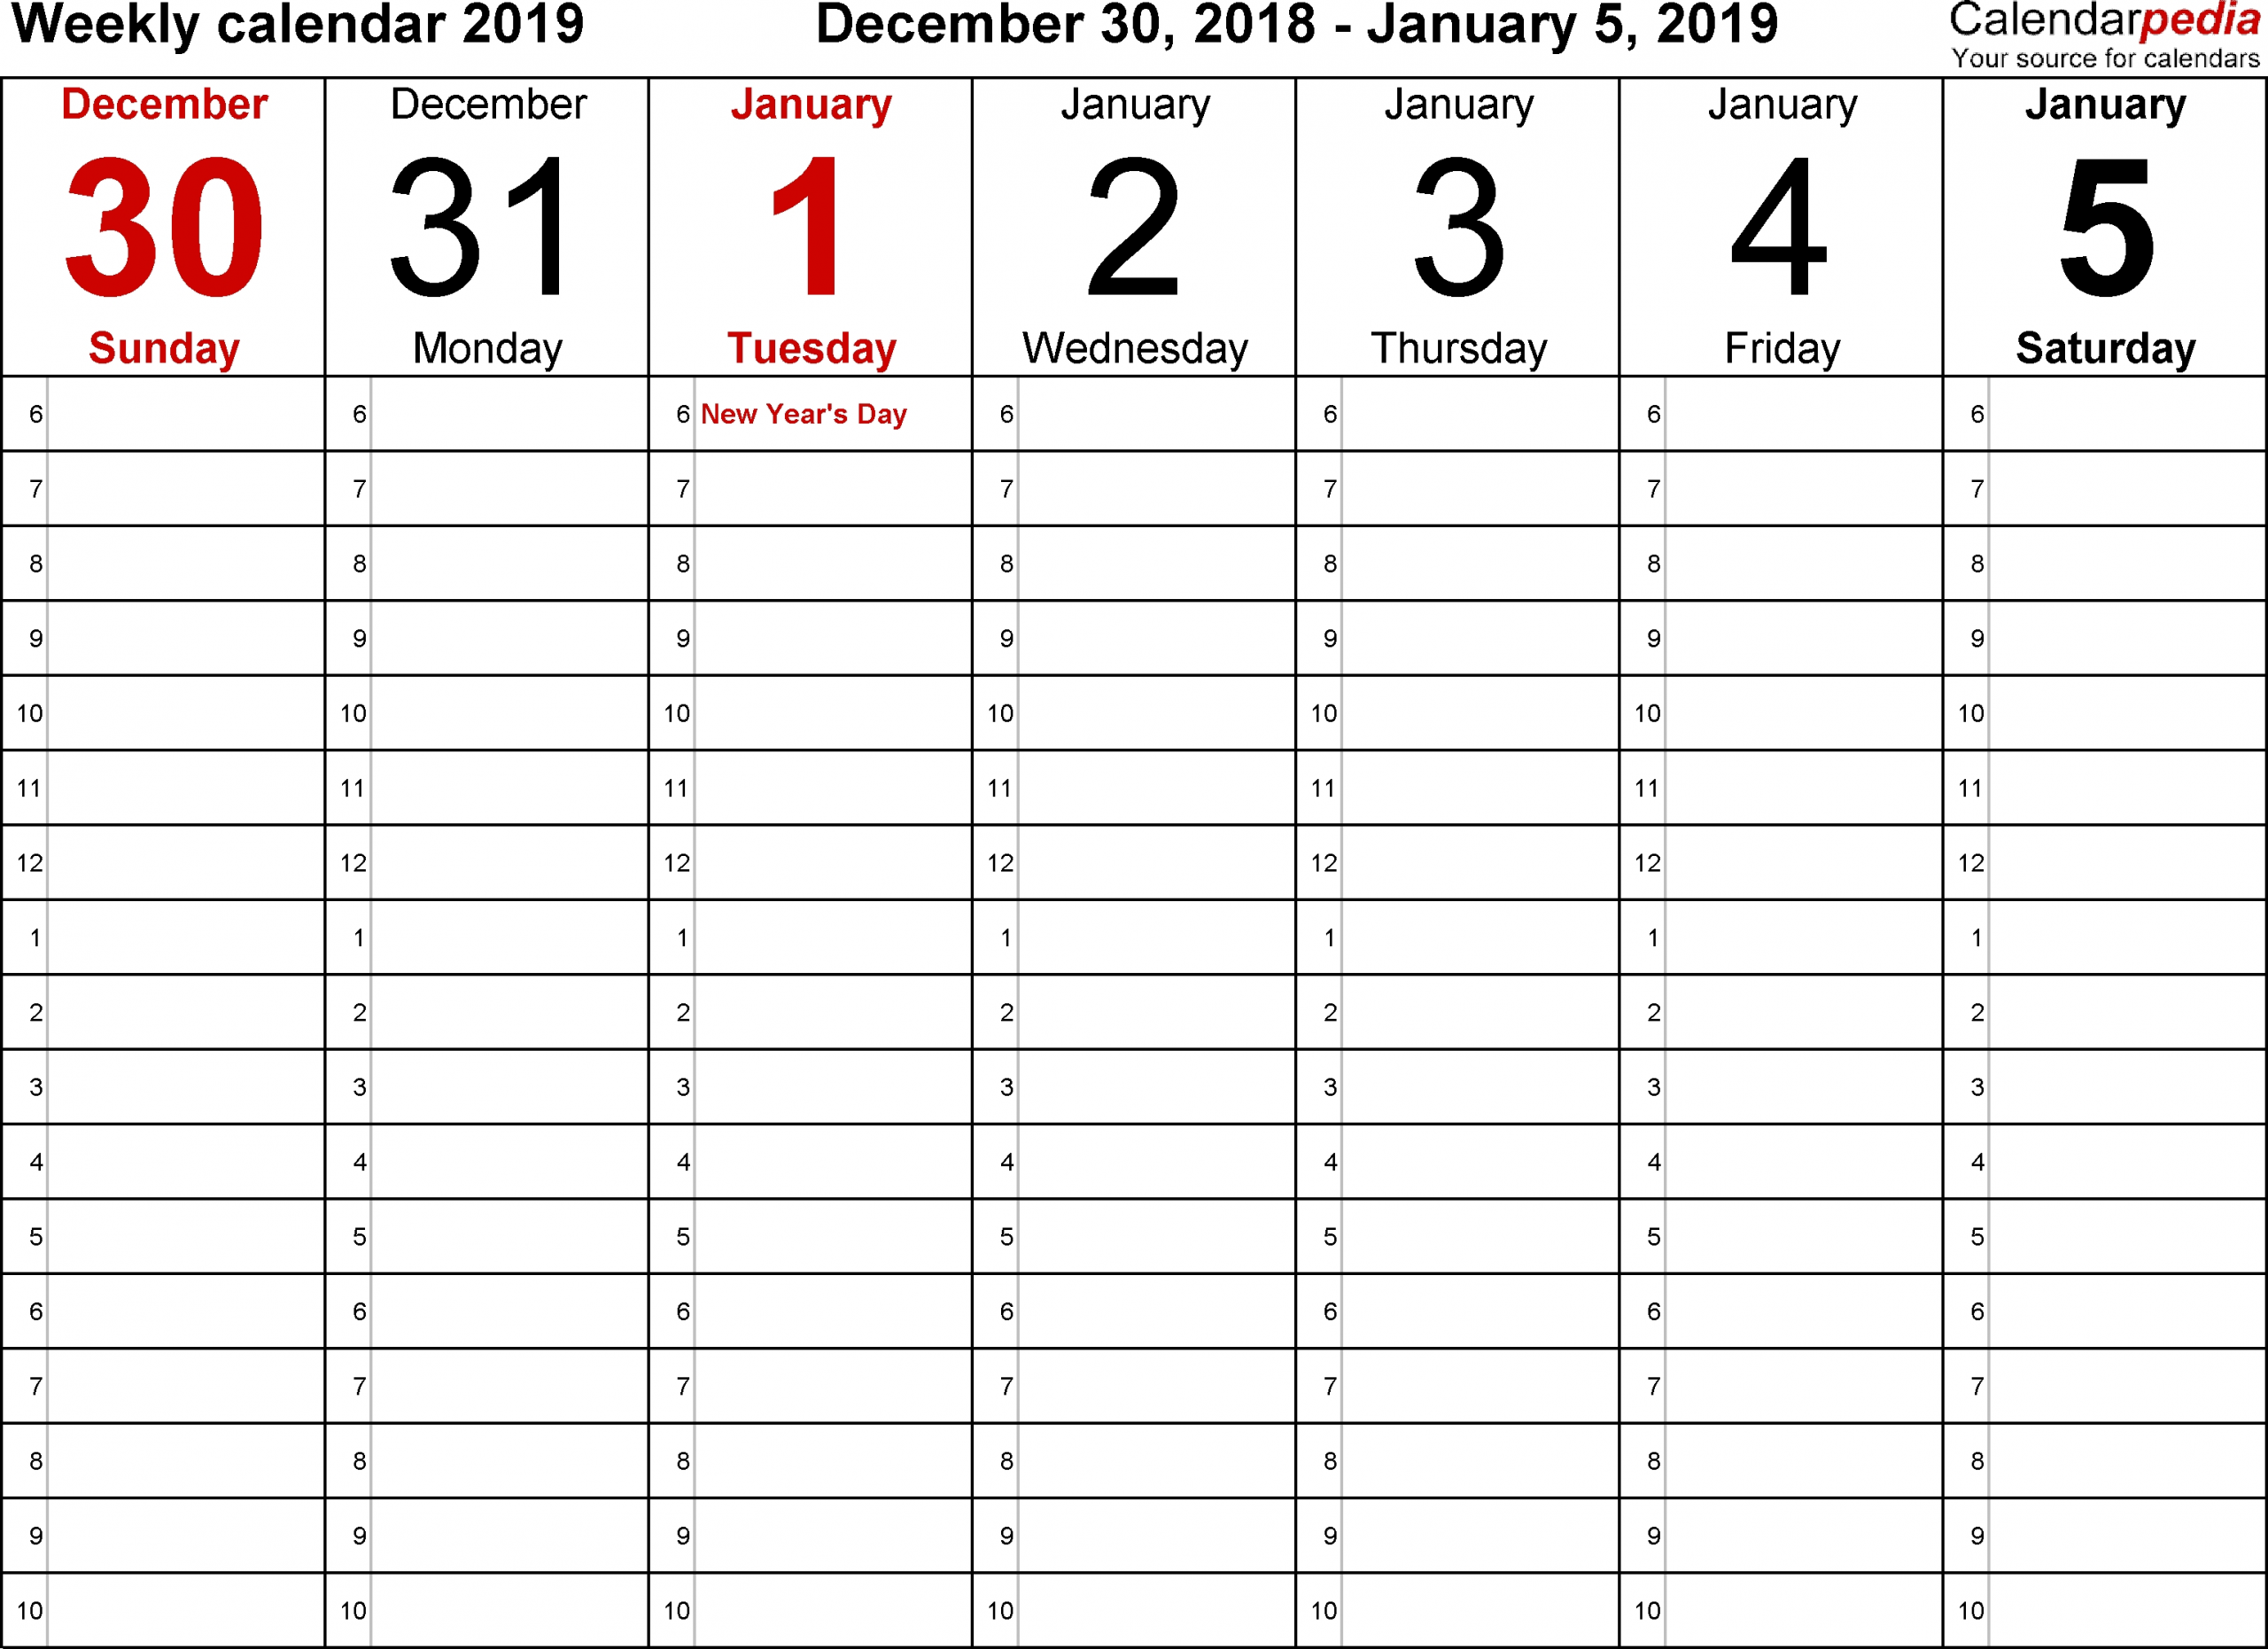 Weekly Calendar 2019 For Word - 12 Free Printable Templates with regard to Free Printable Weekly Calendar Templates